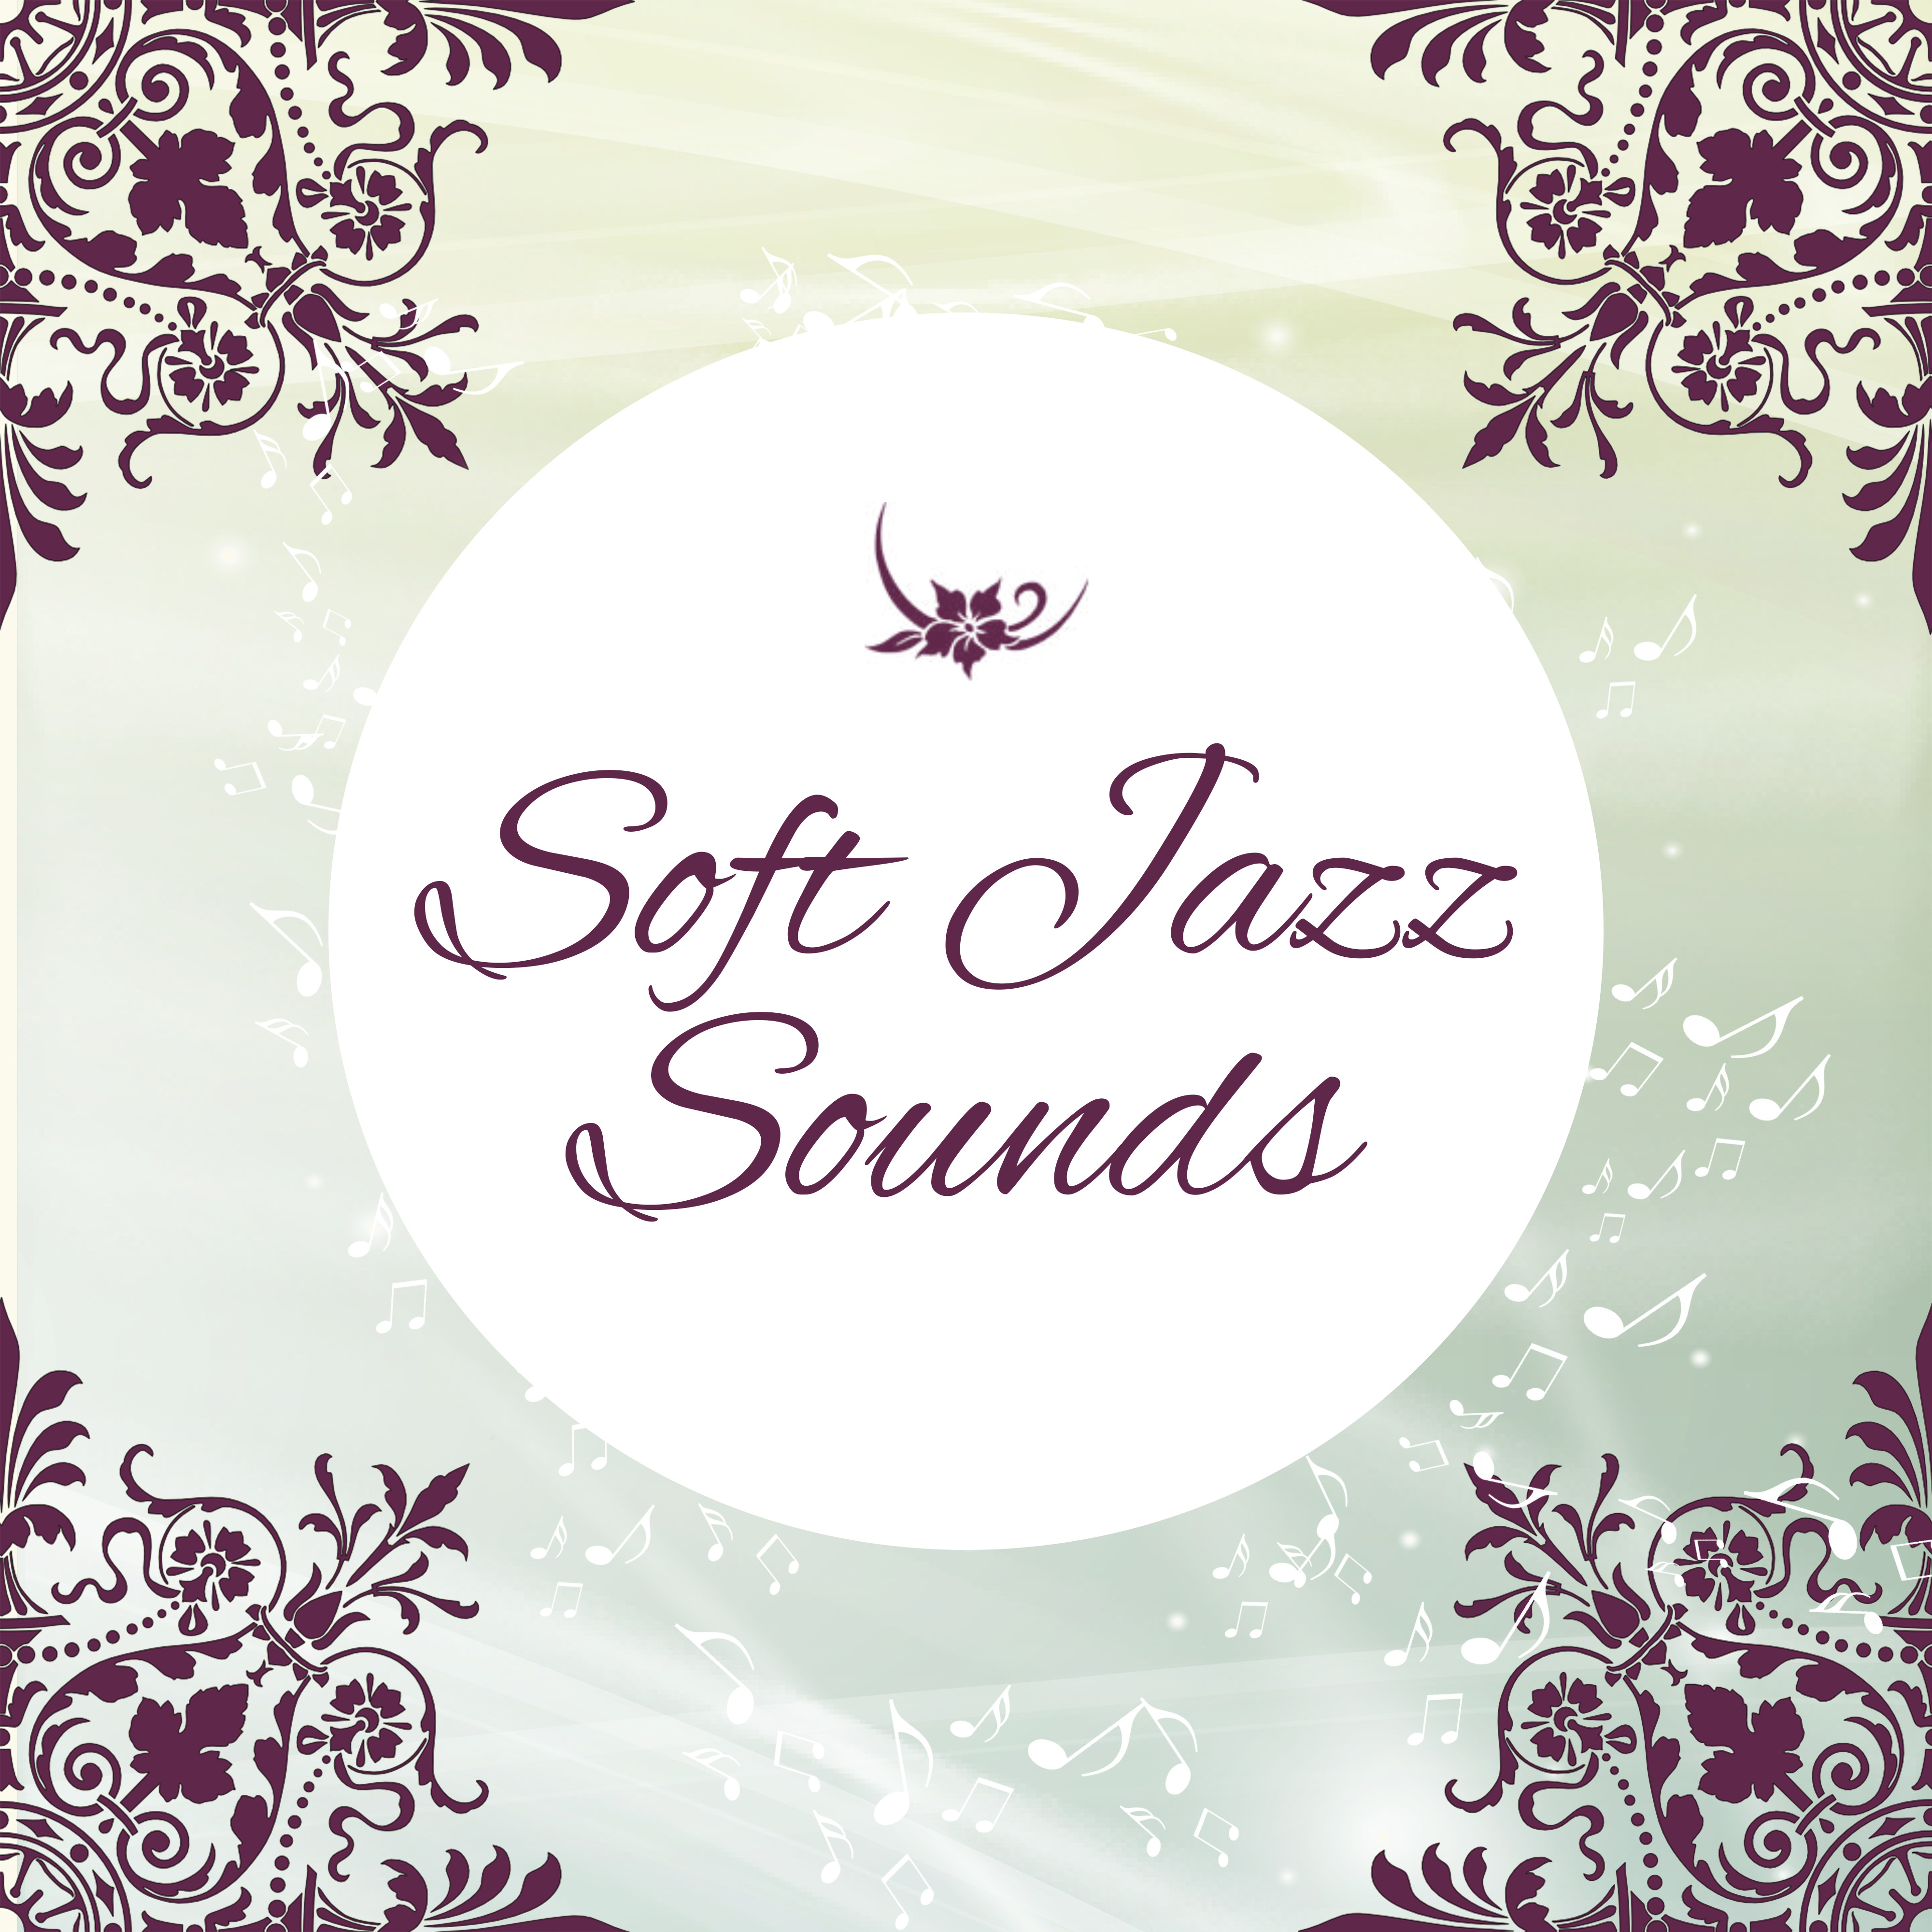 Soft Jazz Sounds – Blue Moon, Evening Jazz Club, Relaxing Smooth Piano